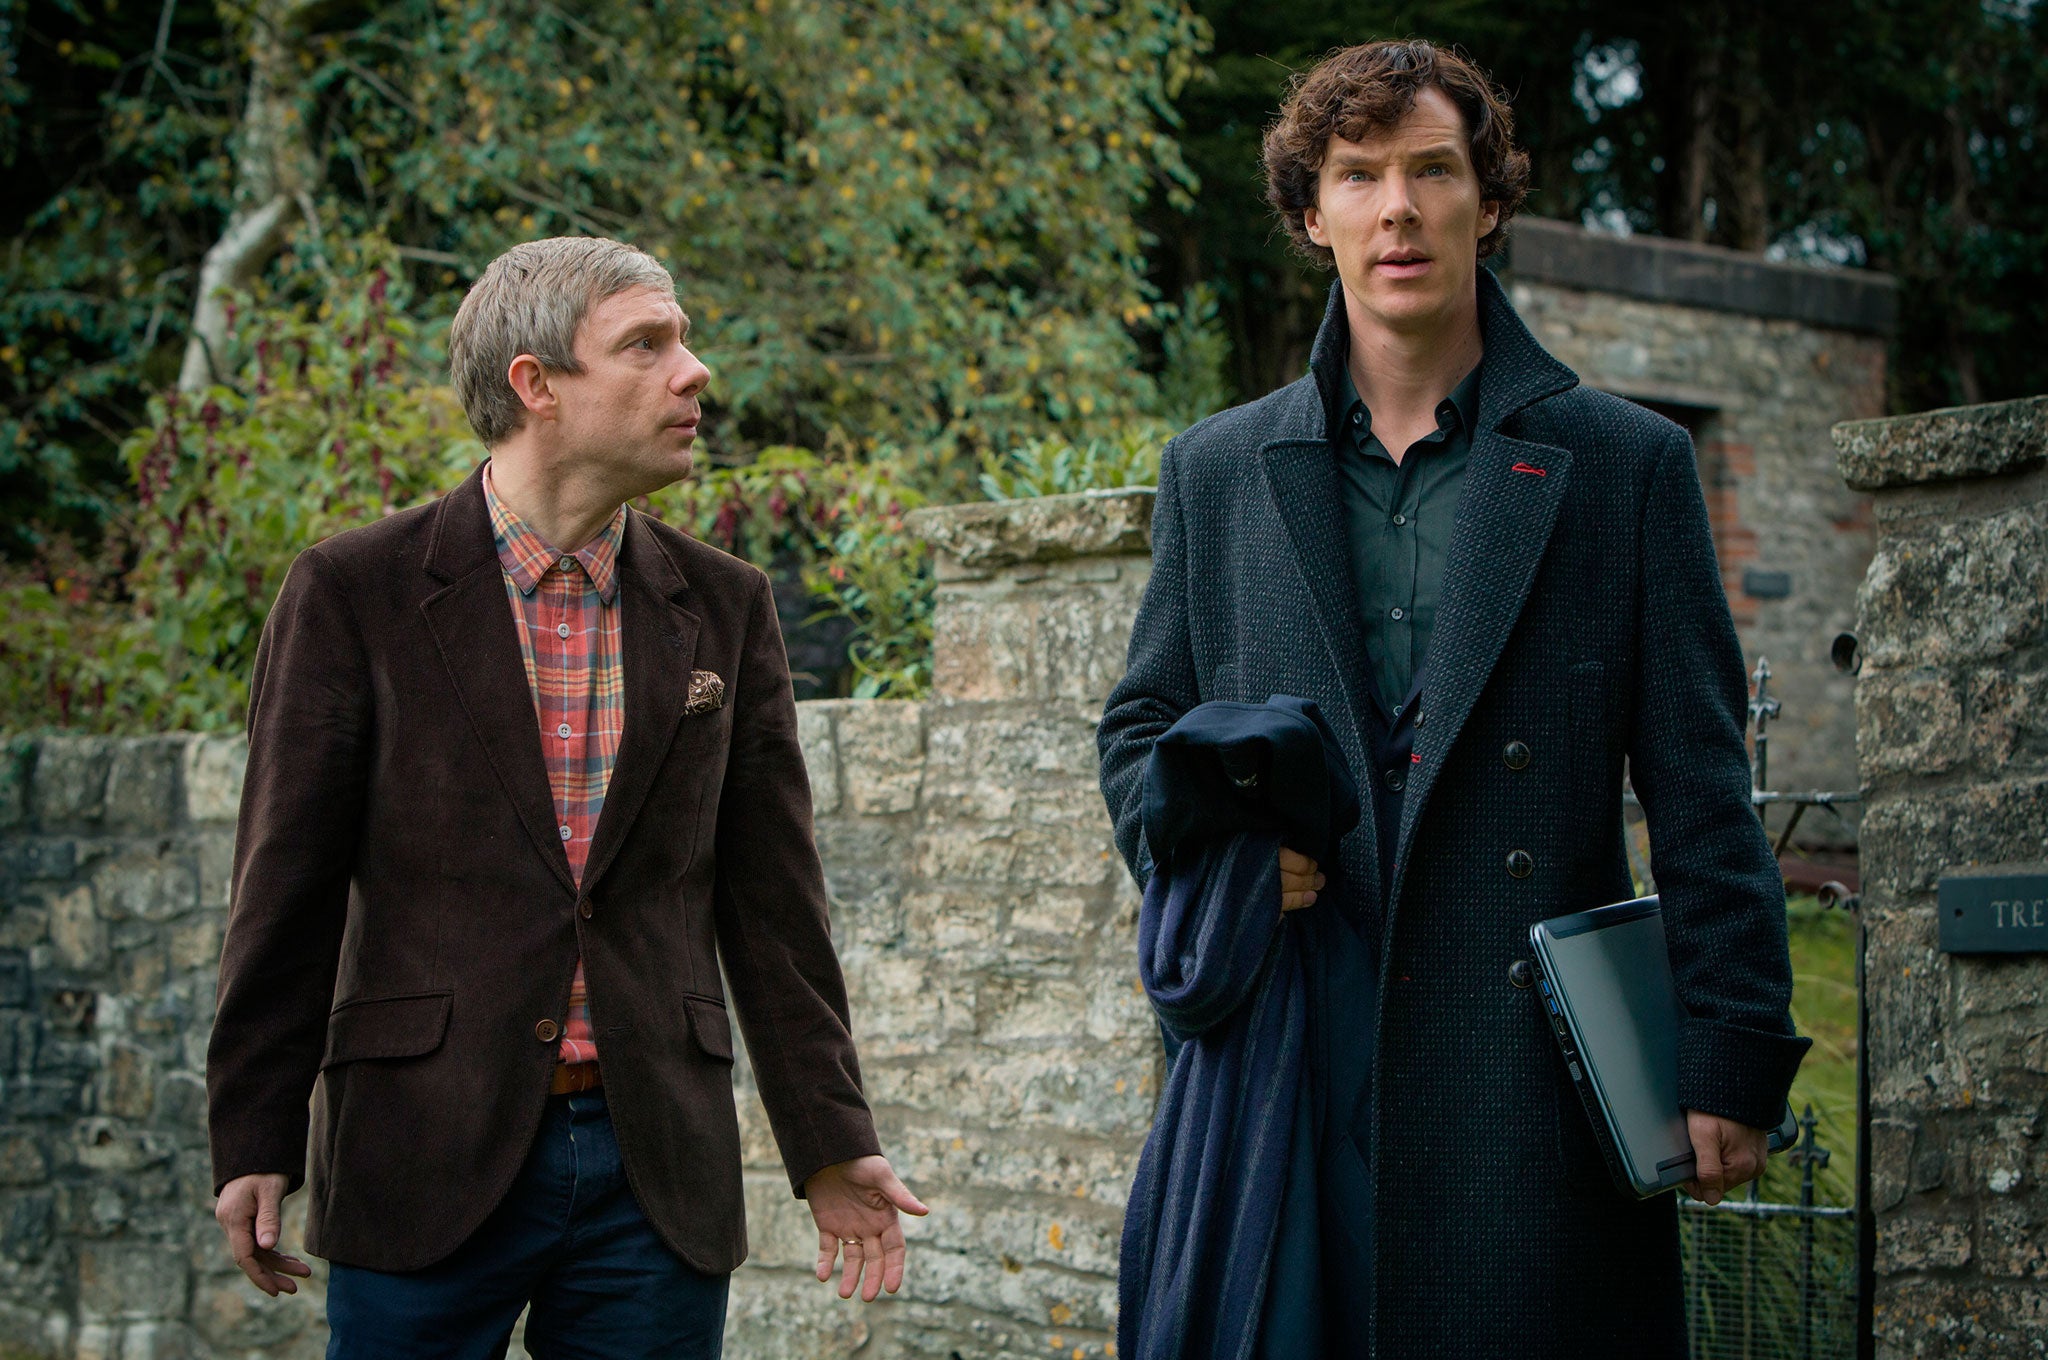 Sherlock is nominated for Best Drama with lead star Benedict Cumberbatch up for Best Drama Performance at the NTAs 2015